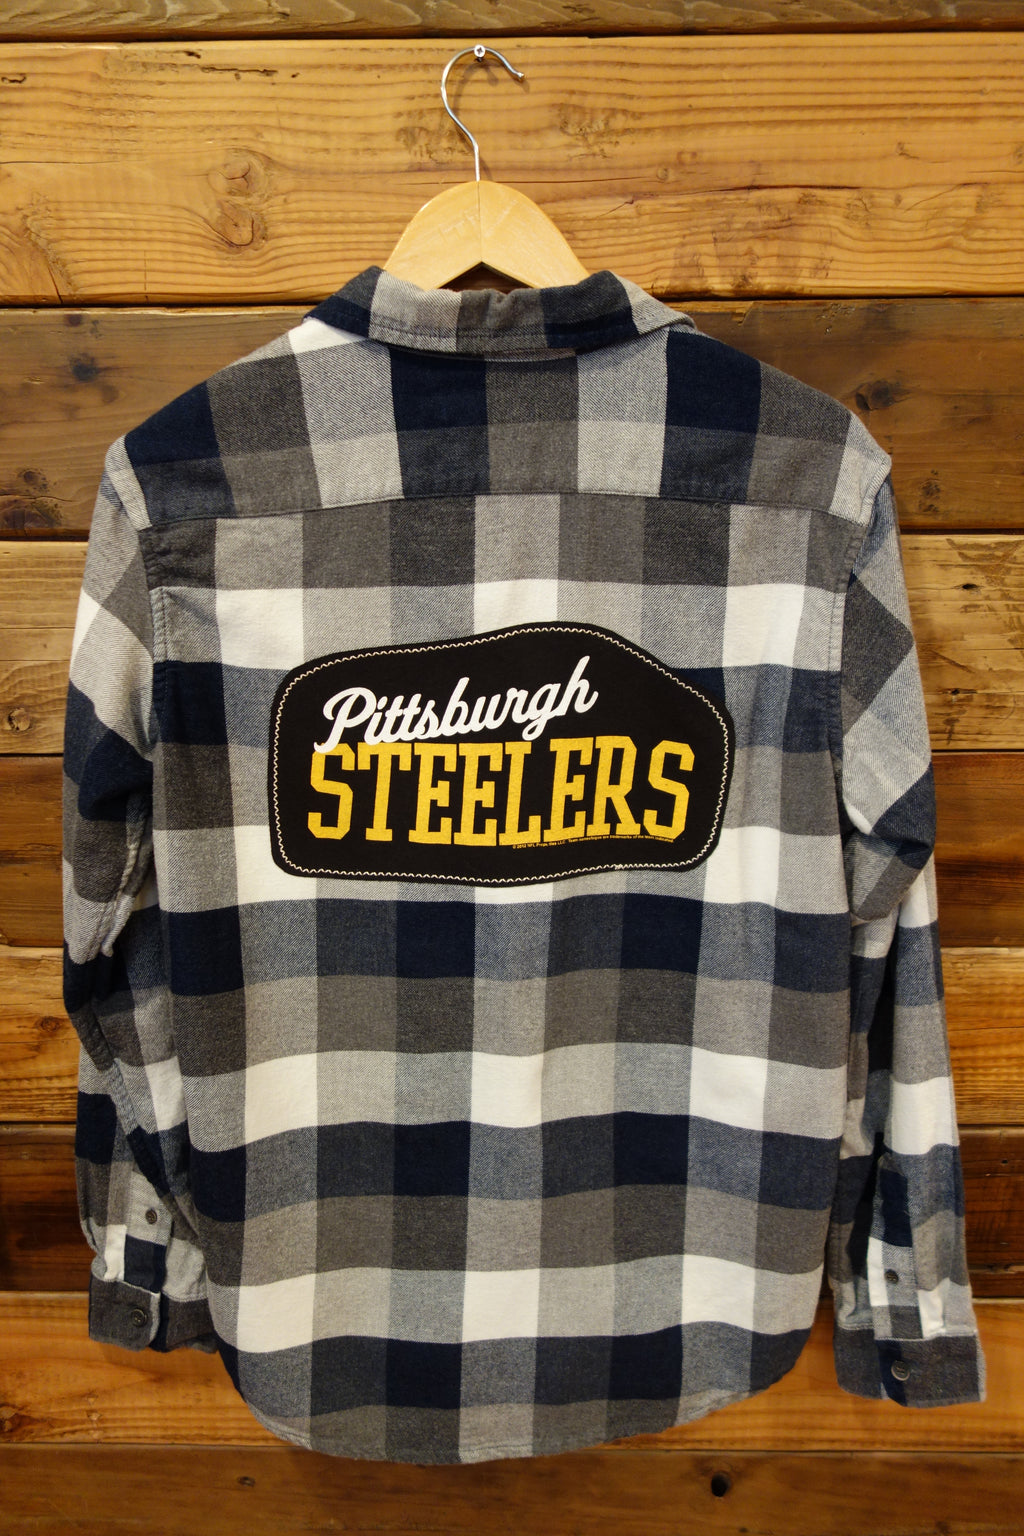 Tailor Vintage flannel one of a kind, Pittsburgh Steelers